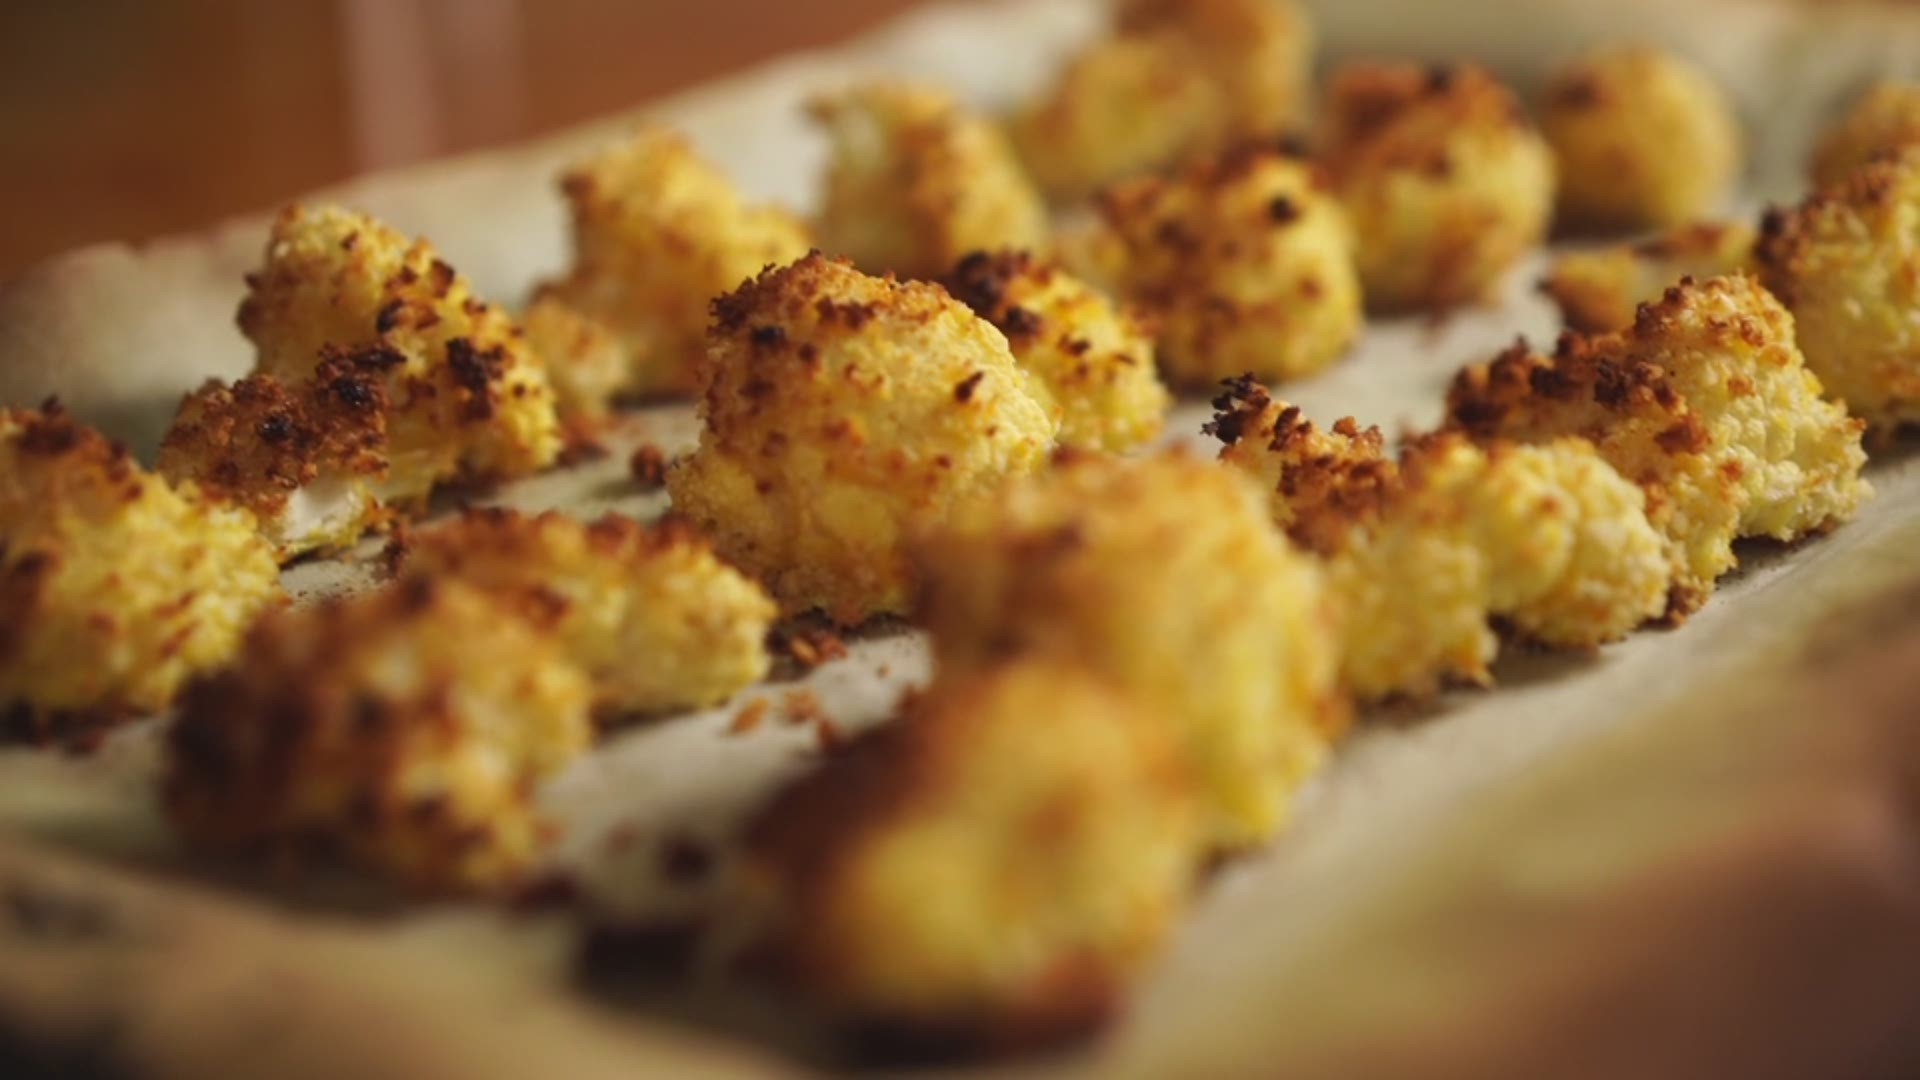 This recipe is sure to be a hit at your Super Bowl party! Check out how to make these crispy cauliflower bites with a delicious sriracha dipping sauce!